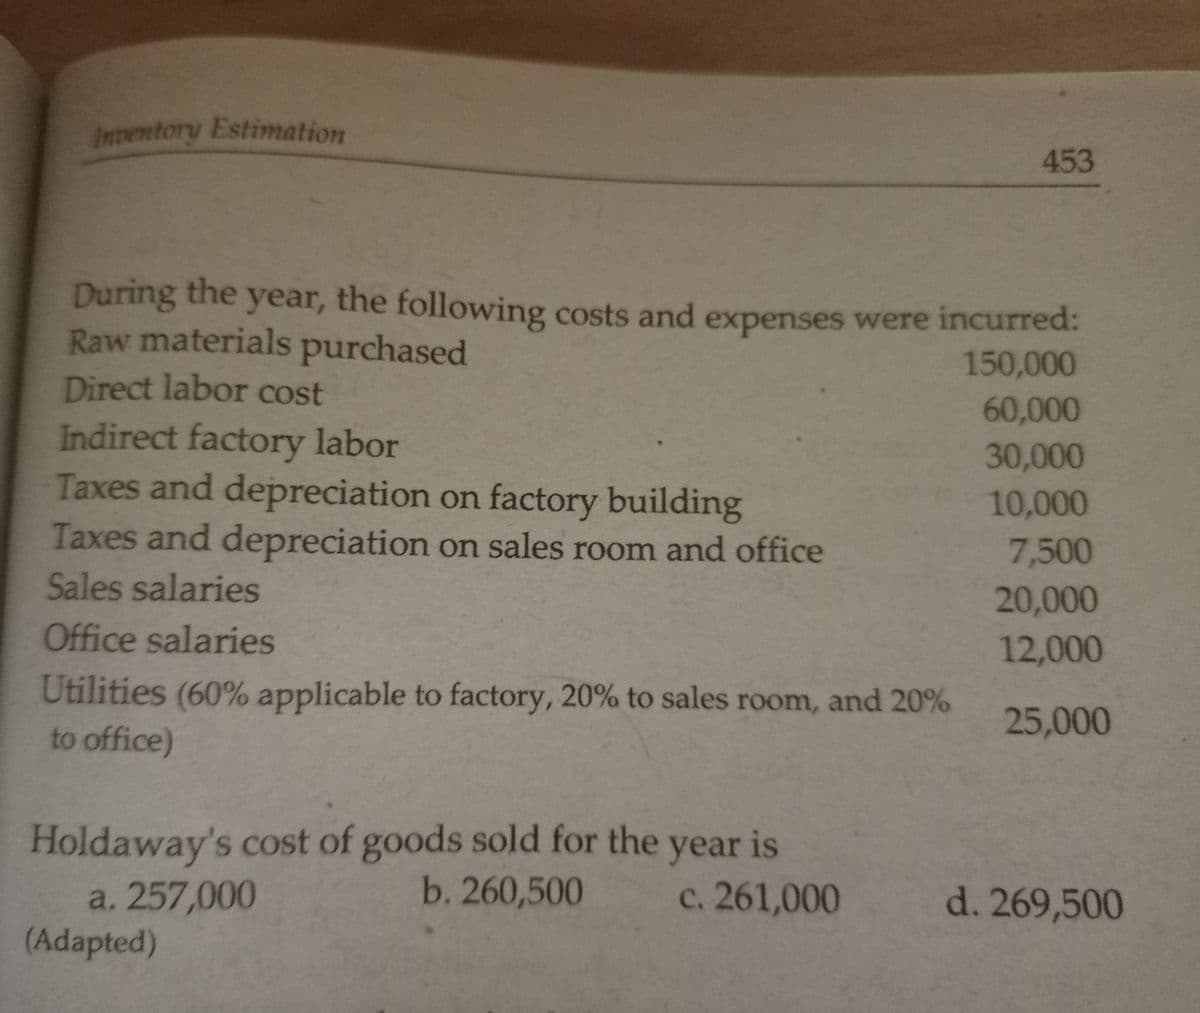 Inventory Estimation
453
During the
Raw materials purchased
year, the following costs and expenses were incurred:
150,000
Direct labor cost
60,000
Indirect factory labor
Taxes and depreciation on factory building
30,000
10,000
Taxes and depreciation on sales room and office
7,500
Sales salaries
20,000
Office salaries
12,000
Utilities (60% applicable to factory, 20% to sales room, and 20%
to office)
25,000
Holdaway's cost of goods sold for the year is
b. 260,500
c. 261,000 d. 269,500
a. 257,000
(Adapted)
